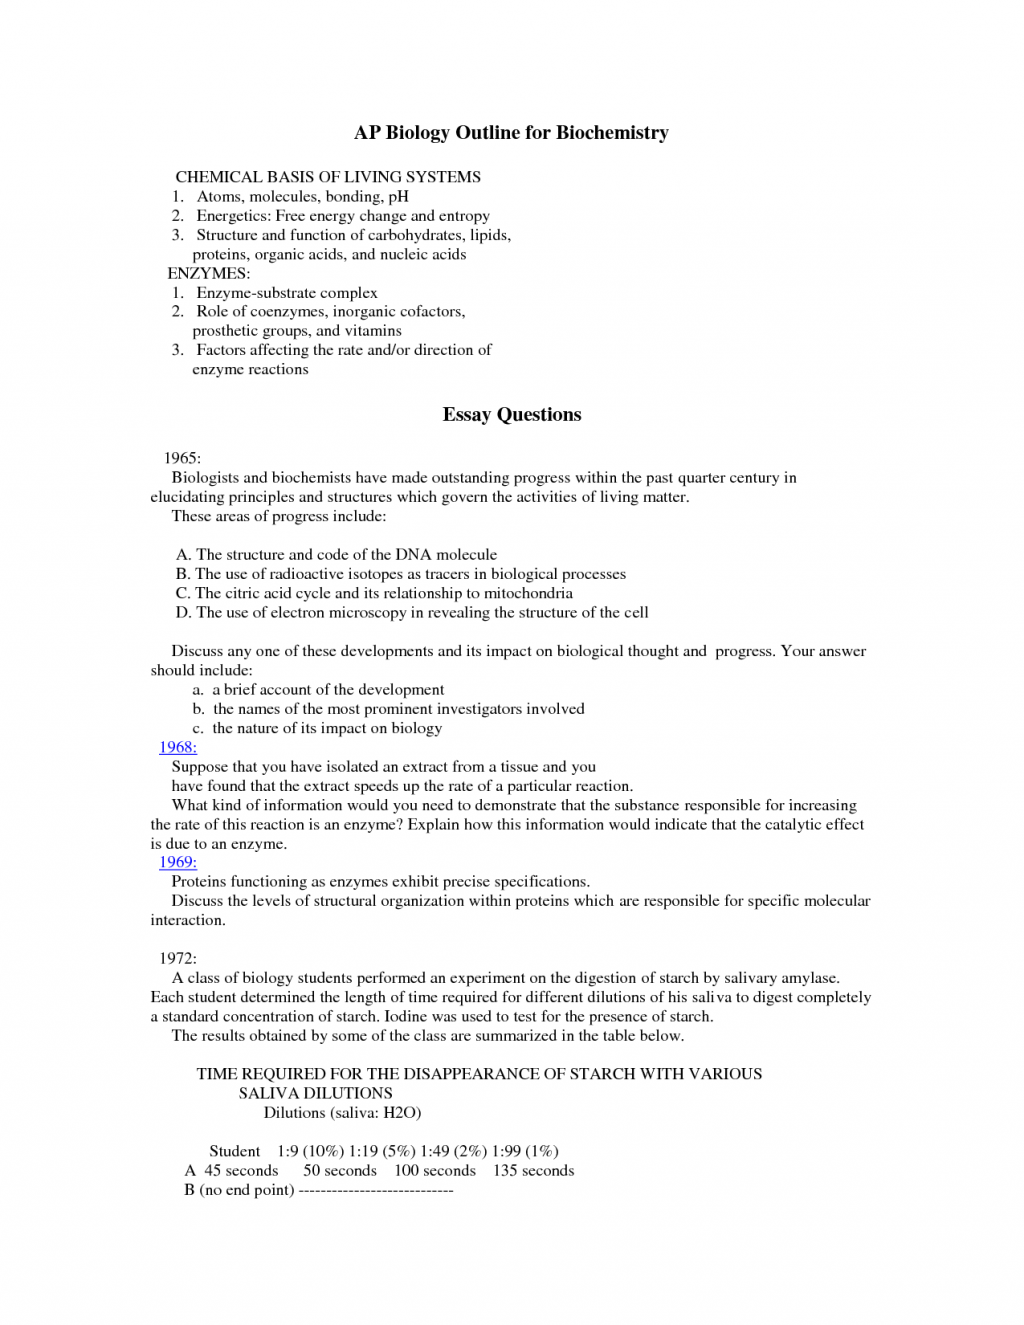 Science fair research paper template